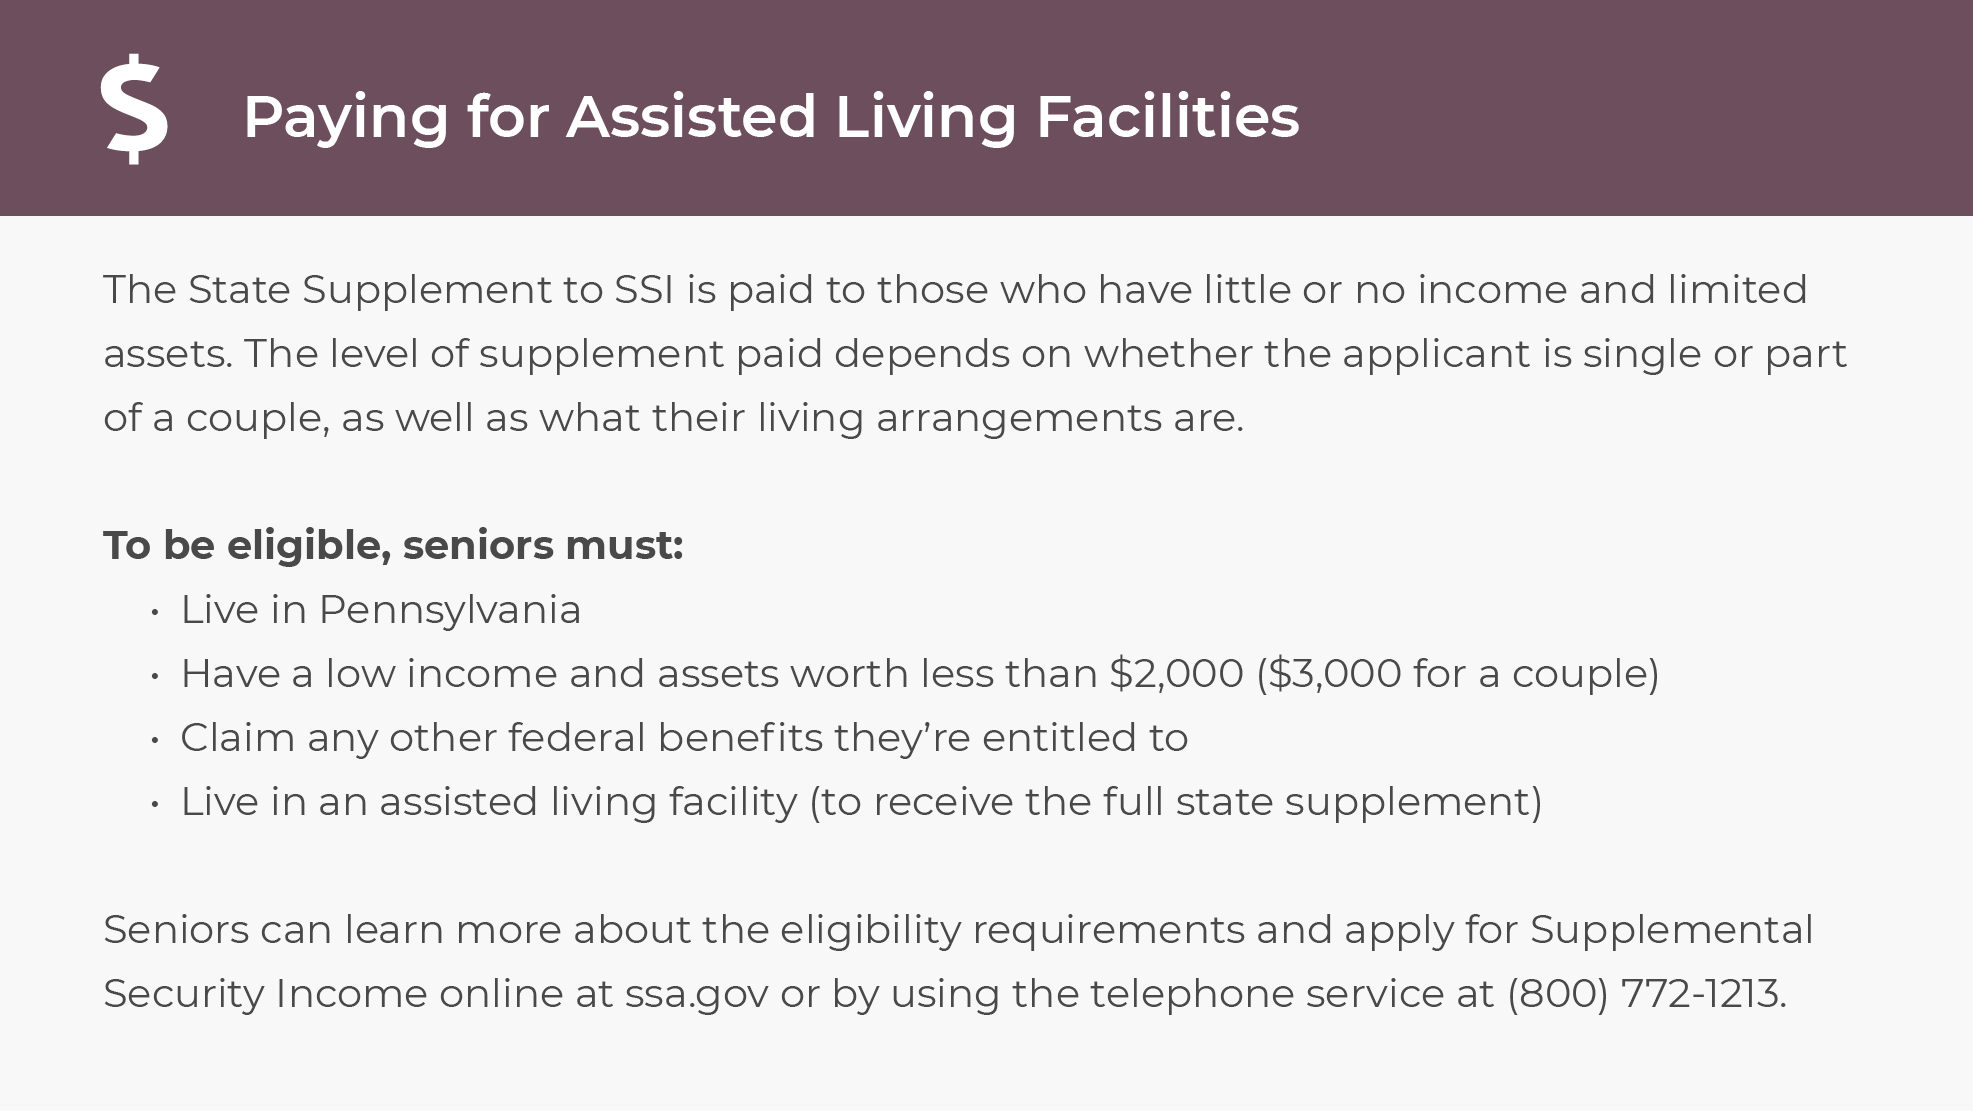 Paying for assisted living facilities